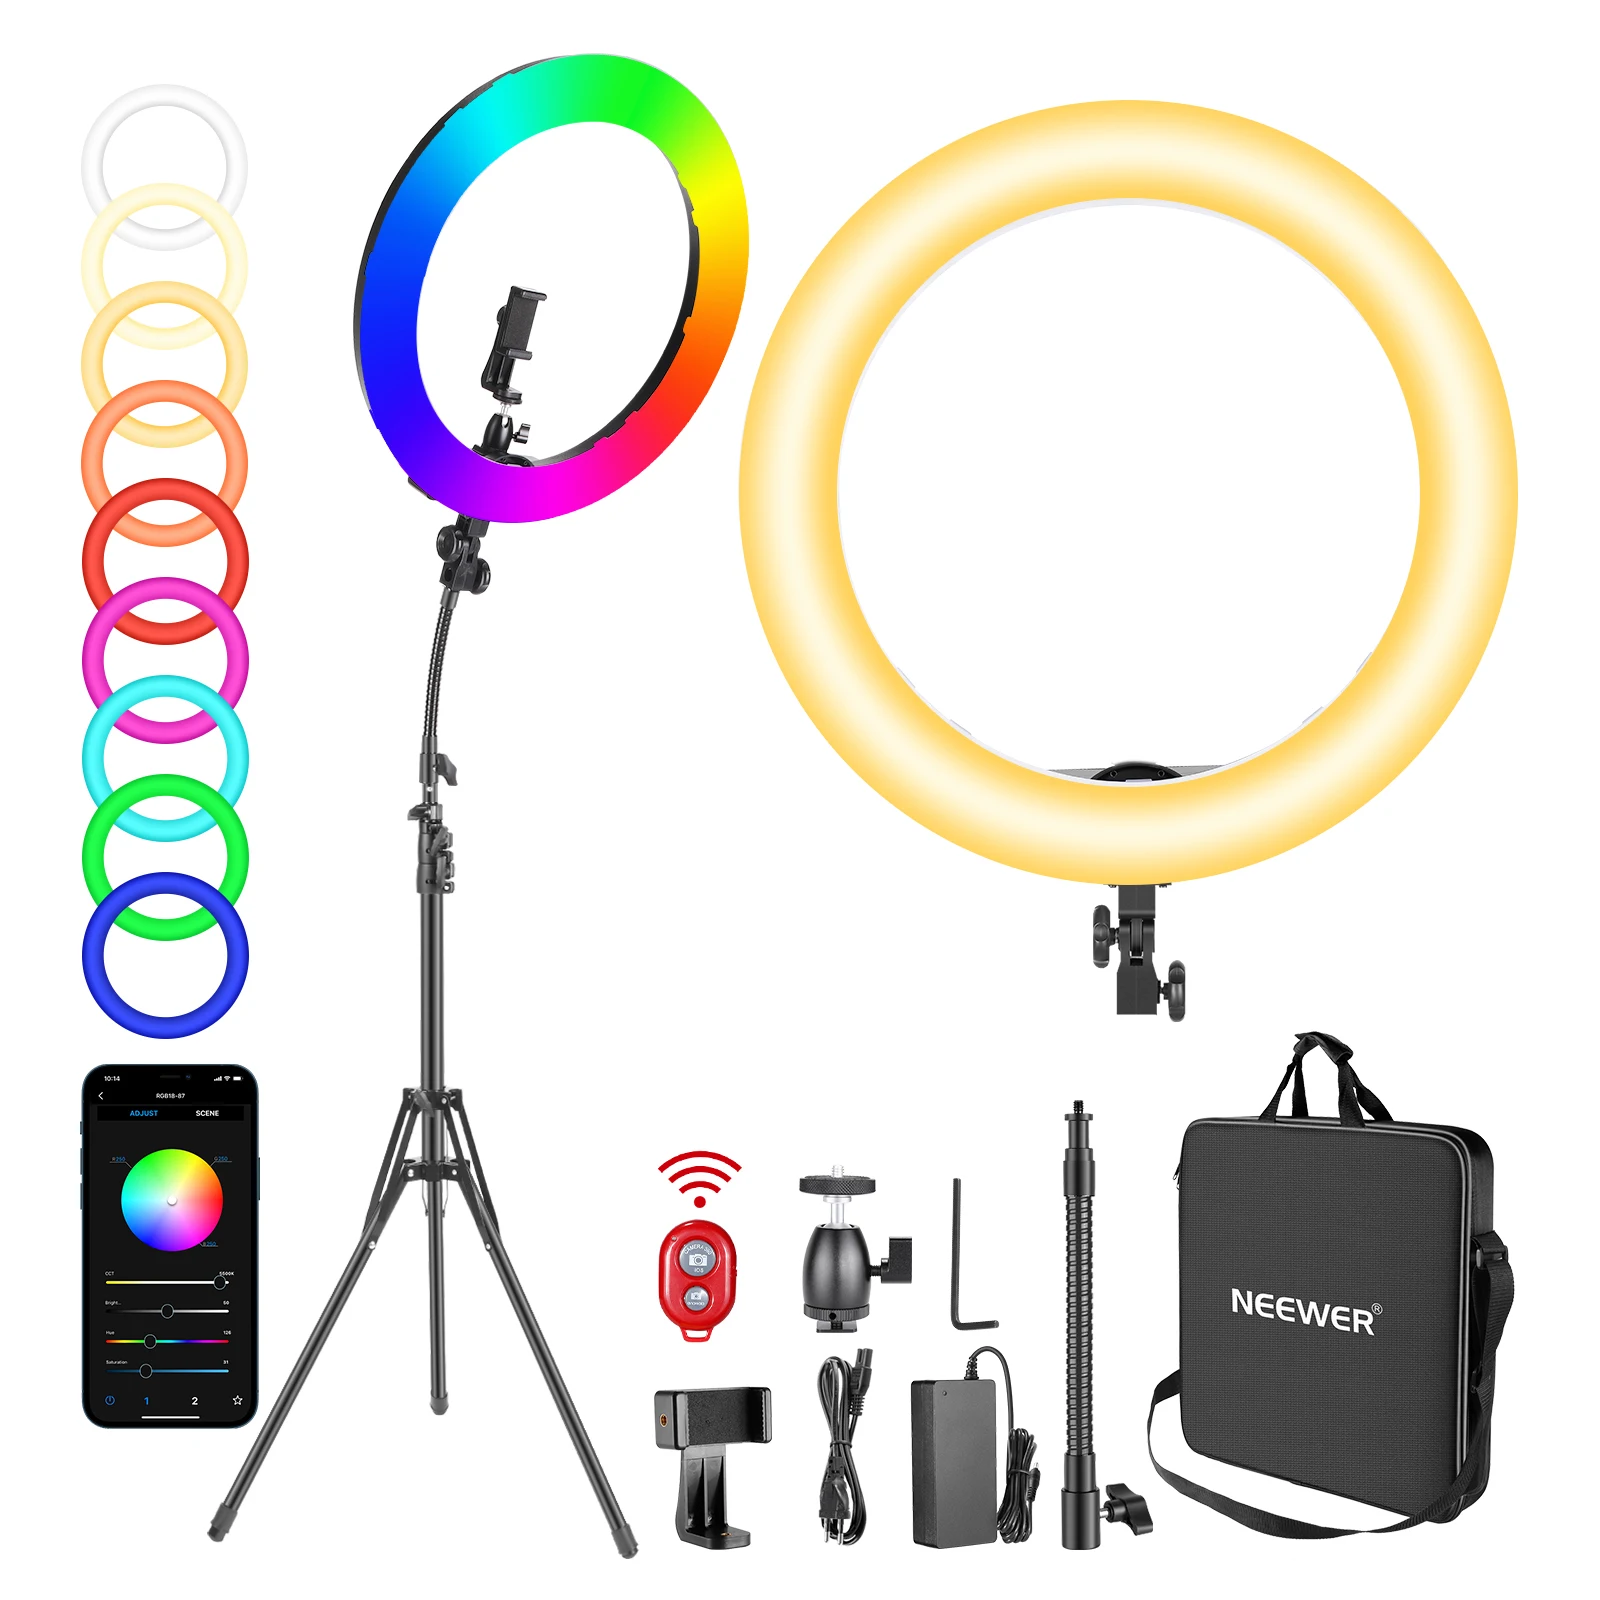 

Neewer 18-inch RGB Ring Light with APP Control, 42W LED Ring Light with Stand for Selfie/Makeup/Party/Vlog/YouTube/Photography